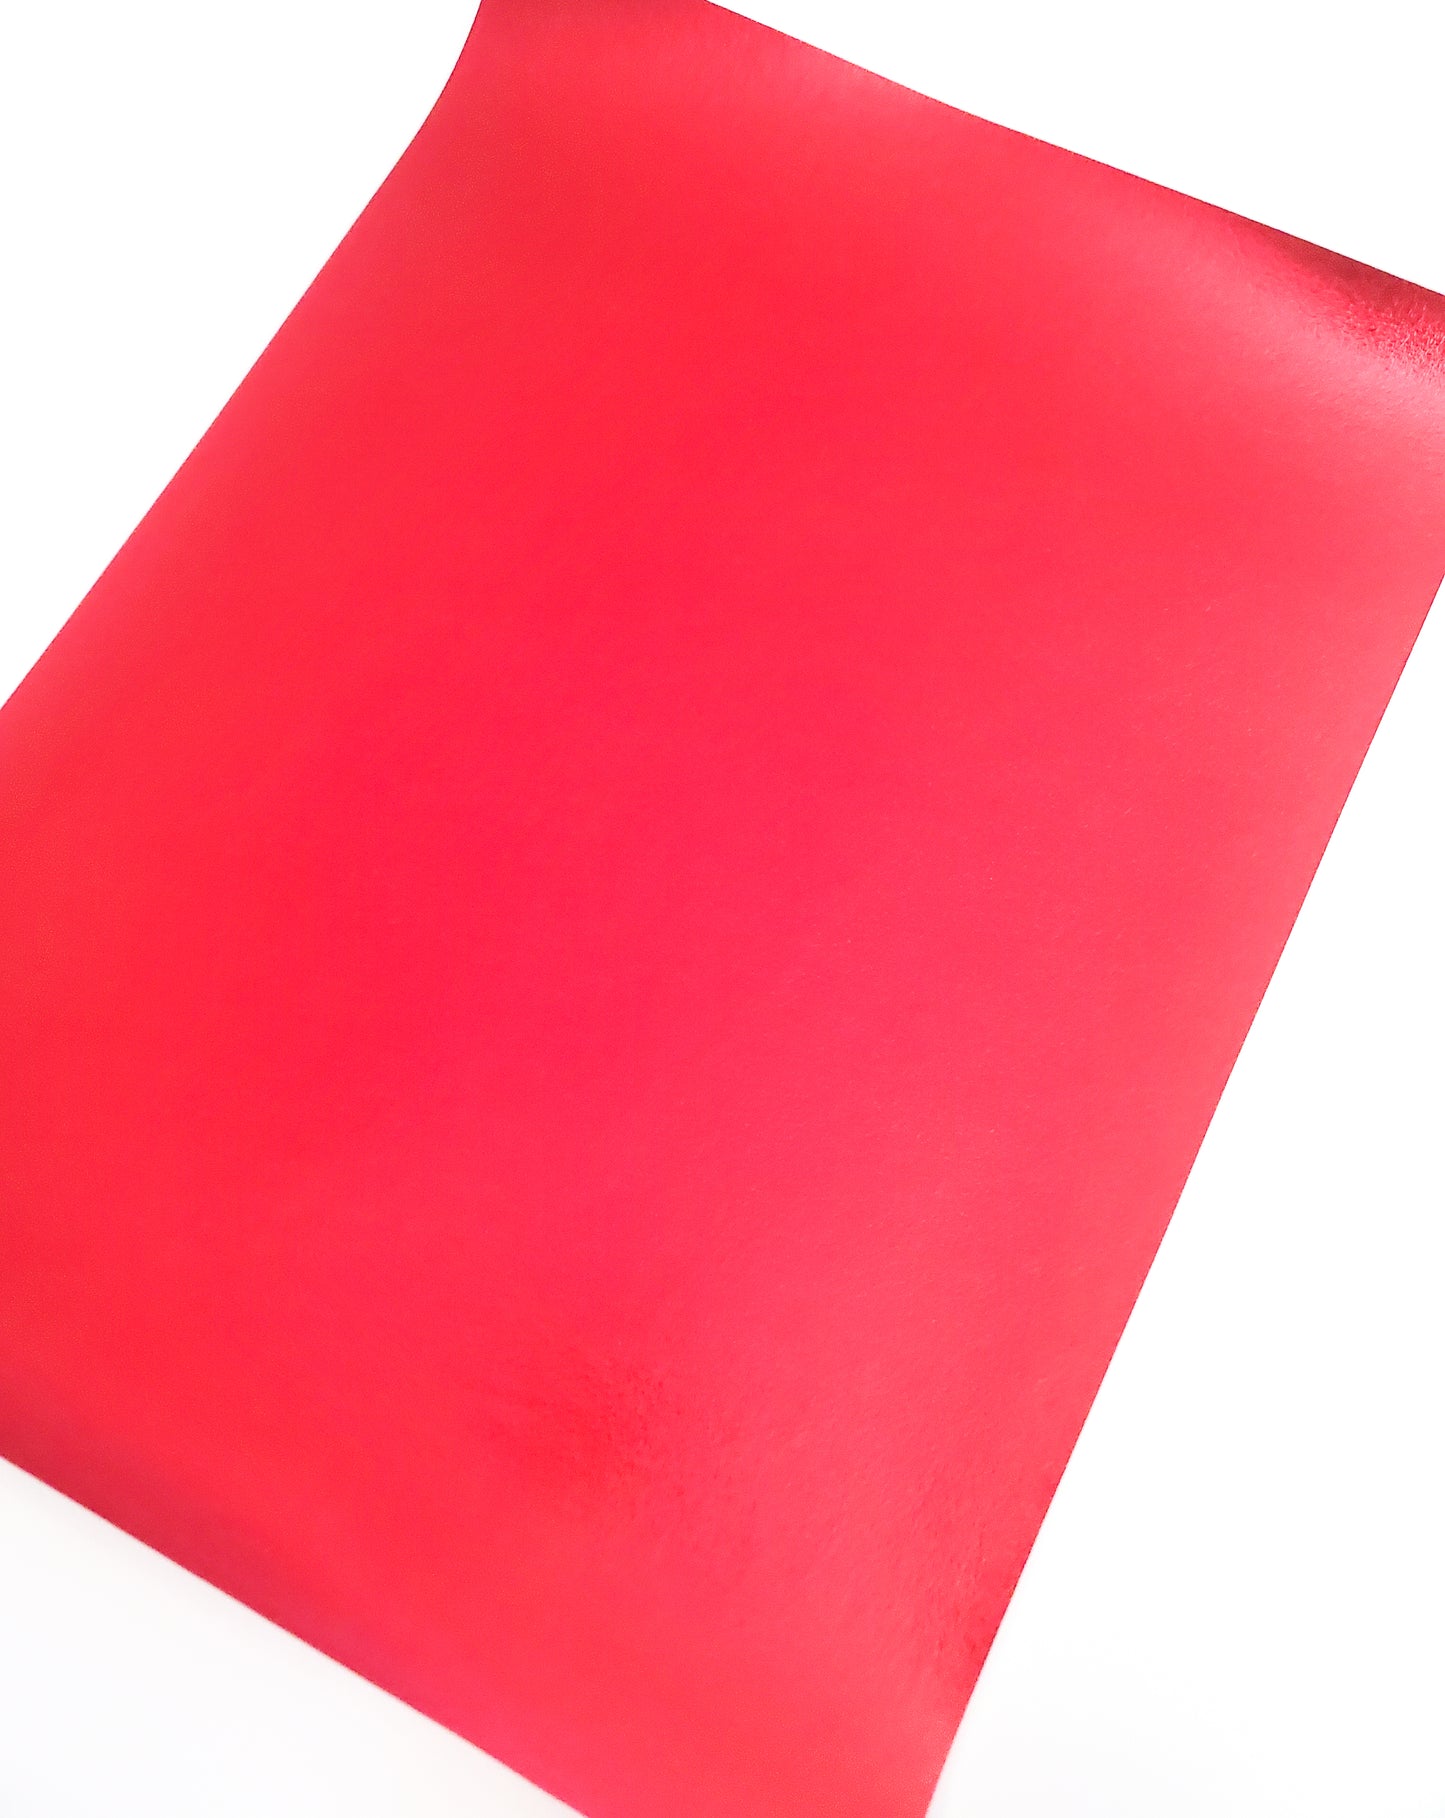 Metallic Red Smooth 9x12 faux leather sheet